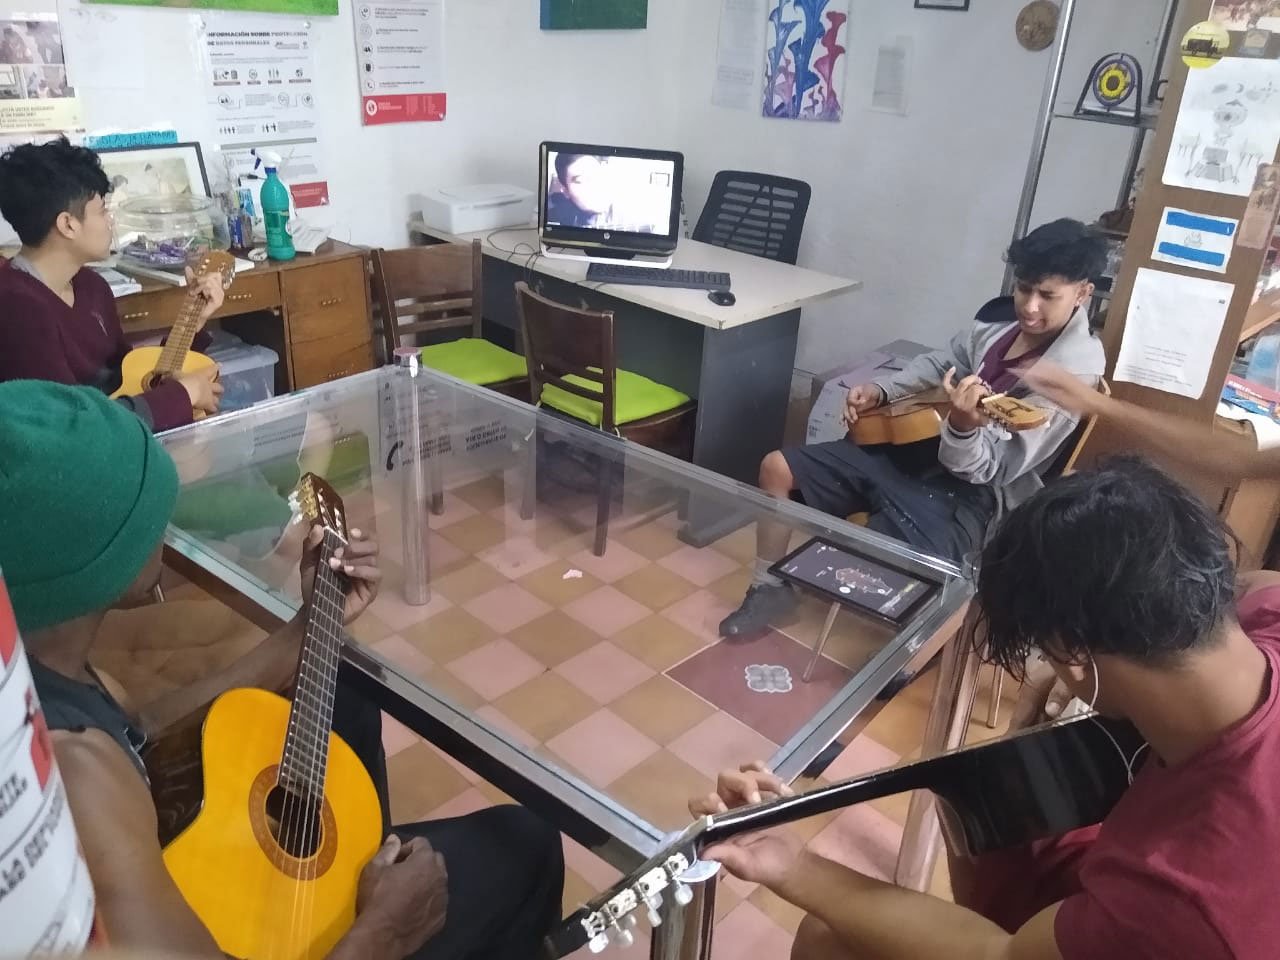 To pass the time, migrants in Casa Tochan in Mexico City receive a guitar class, given by a volunteer over Zoom.